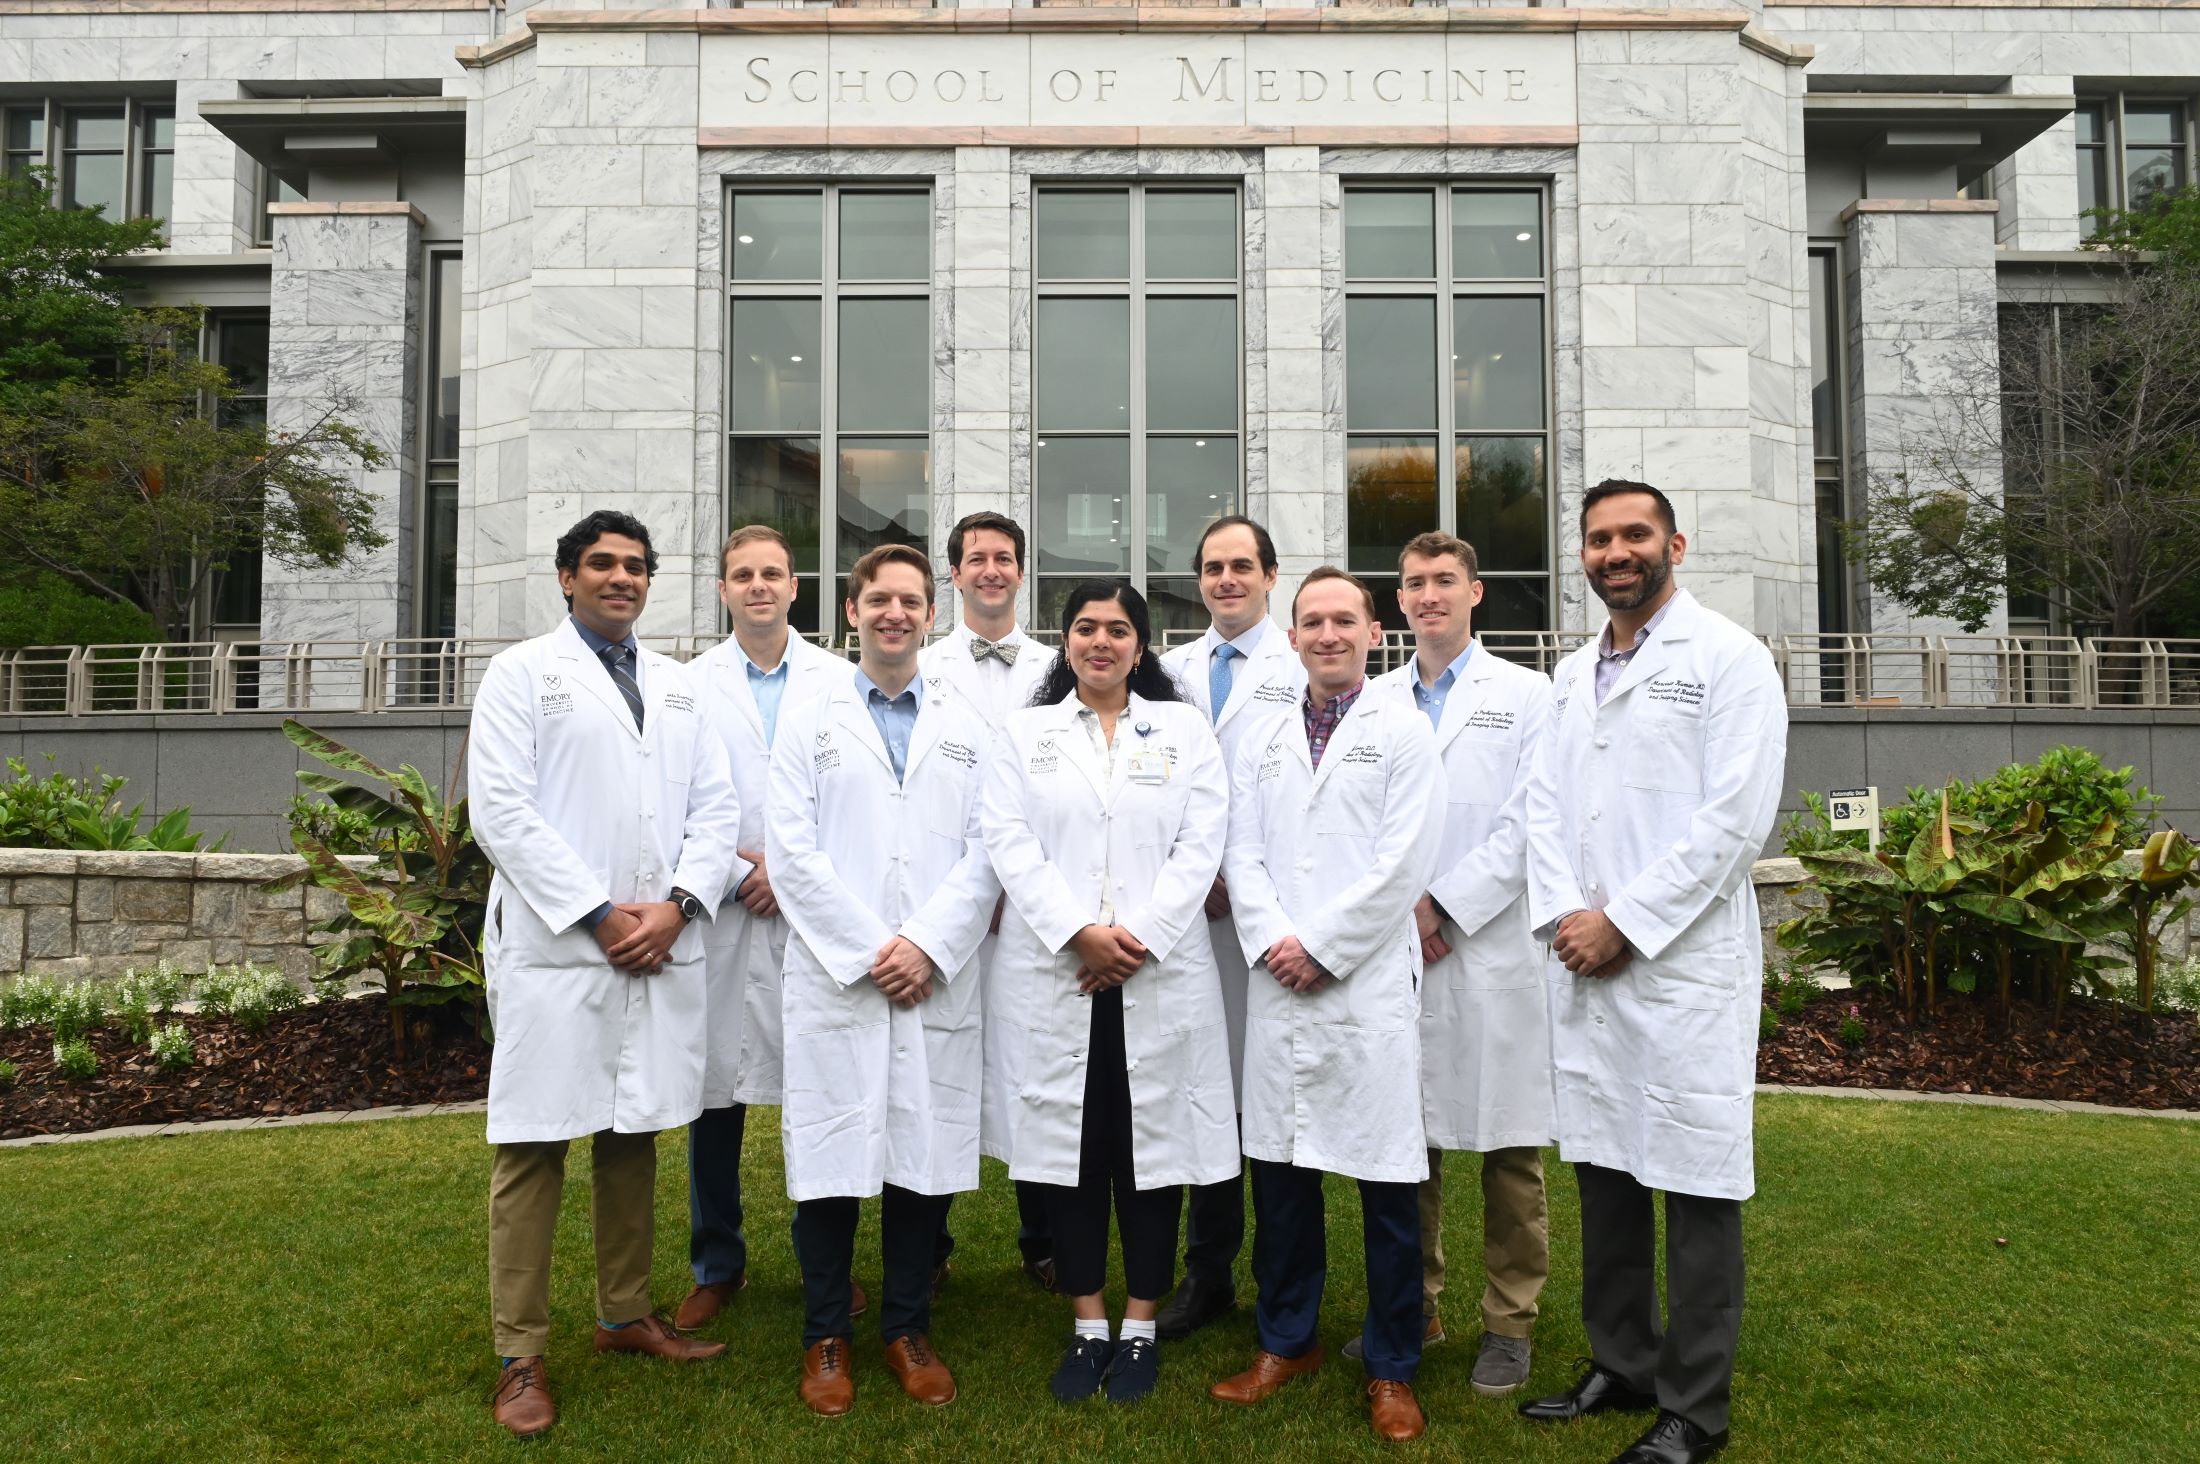 people wearing white doctor coats over pants and dress shirts standing in front of marble building with School of Medicine etched into the stone